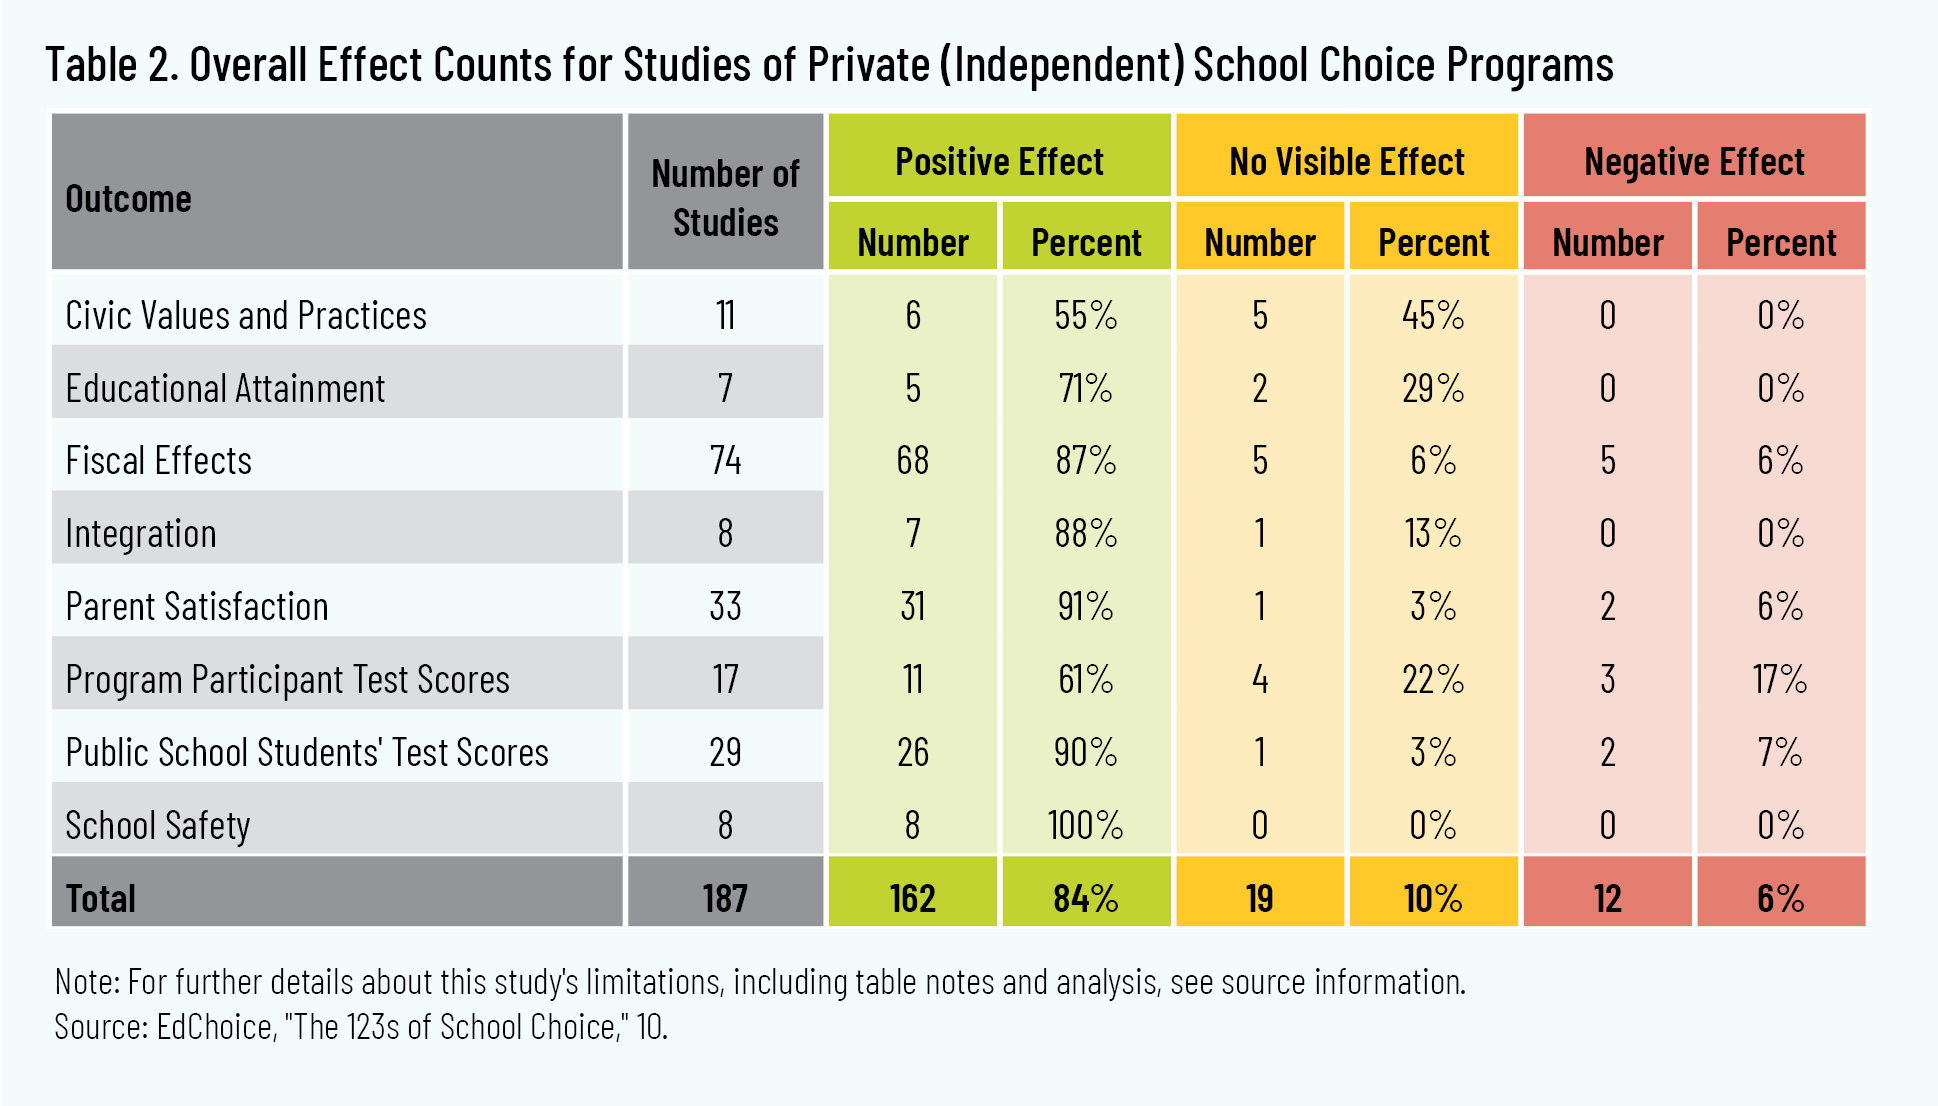 Table 2. Overall Effect Counts for Studies of Private (Independent) School Choice Programs